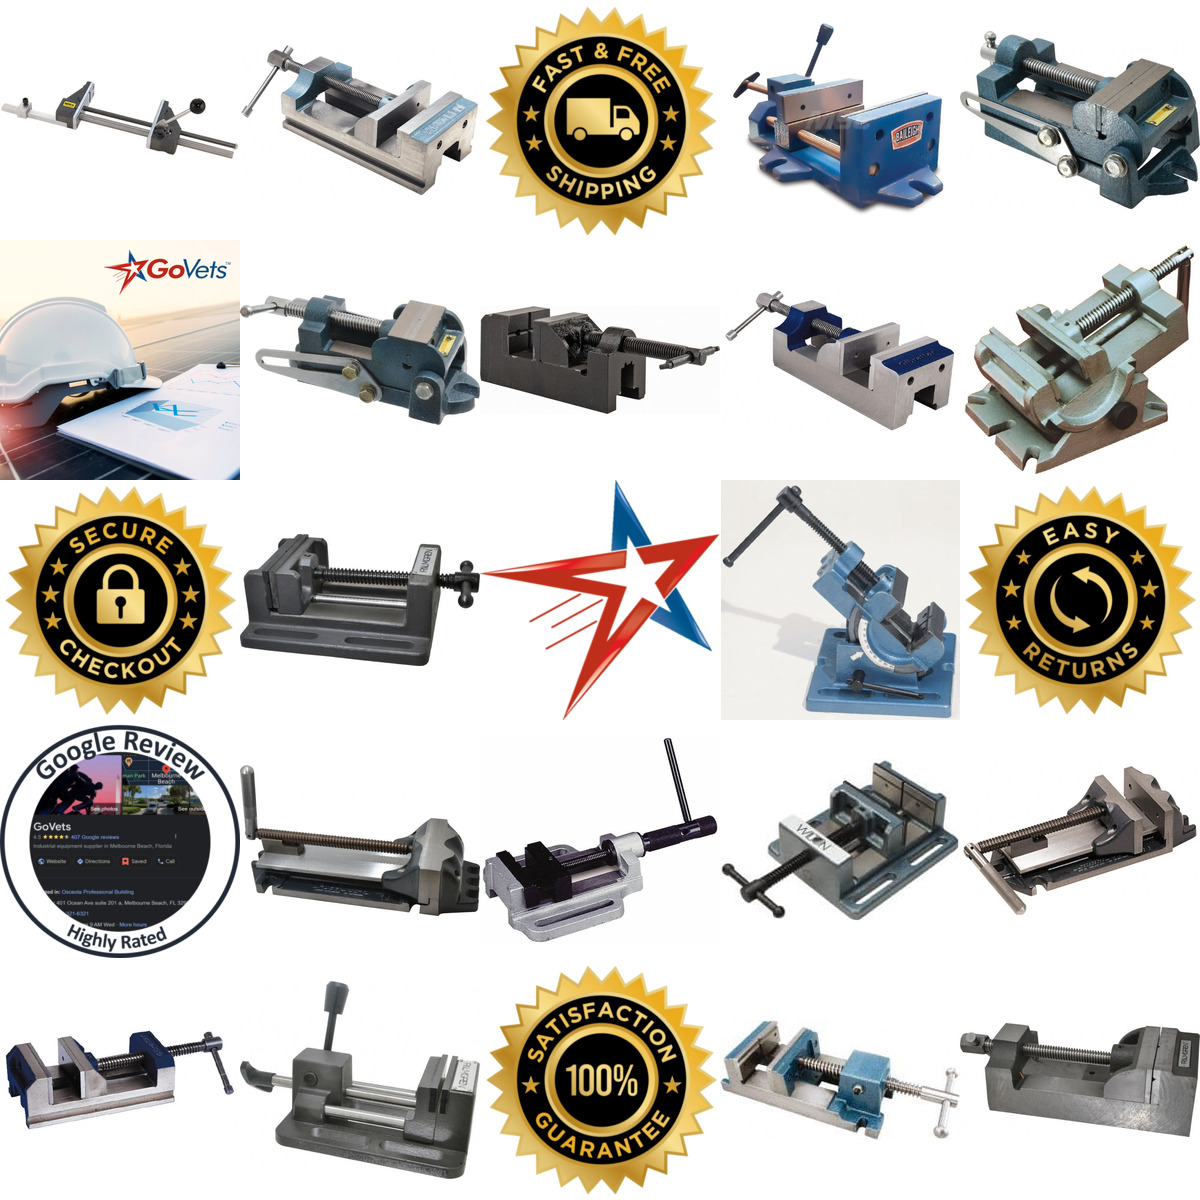 A selection of Drill Press Vises products on GoVets